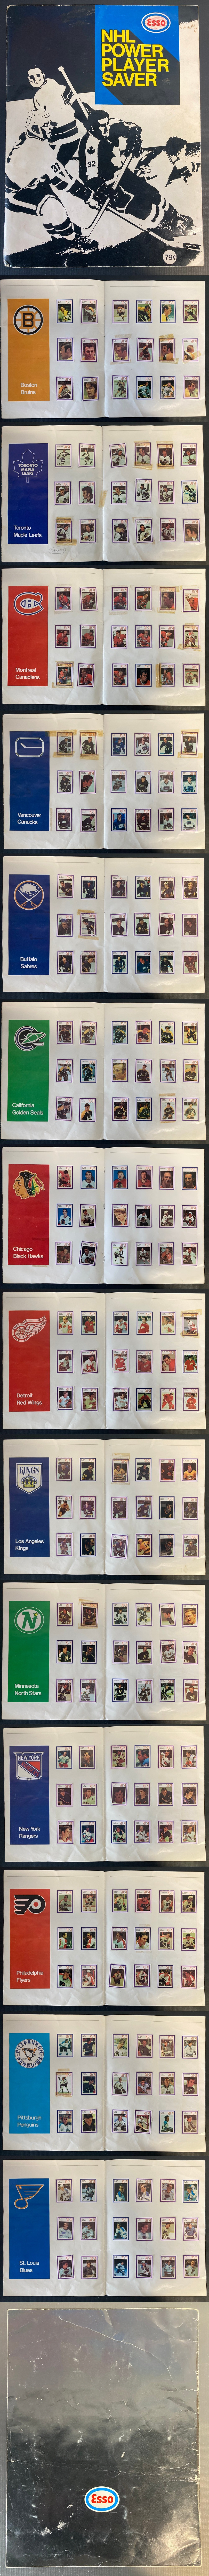 1970-71 ESSO NHL POWER PLAYER STICKERS FULL SET 252/252 IN ALBUM photo